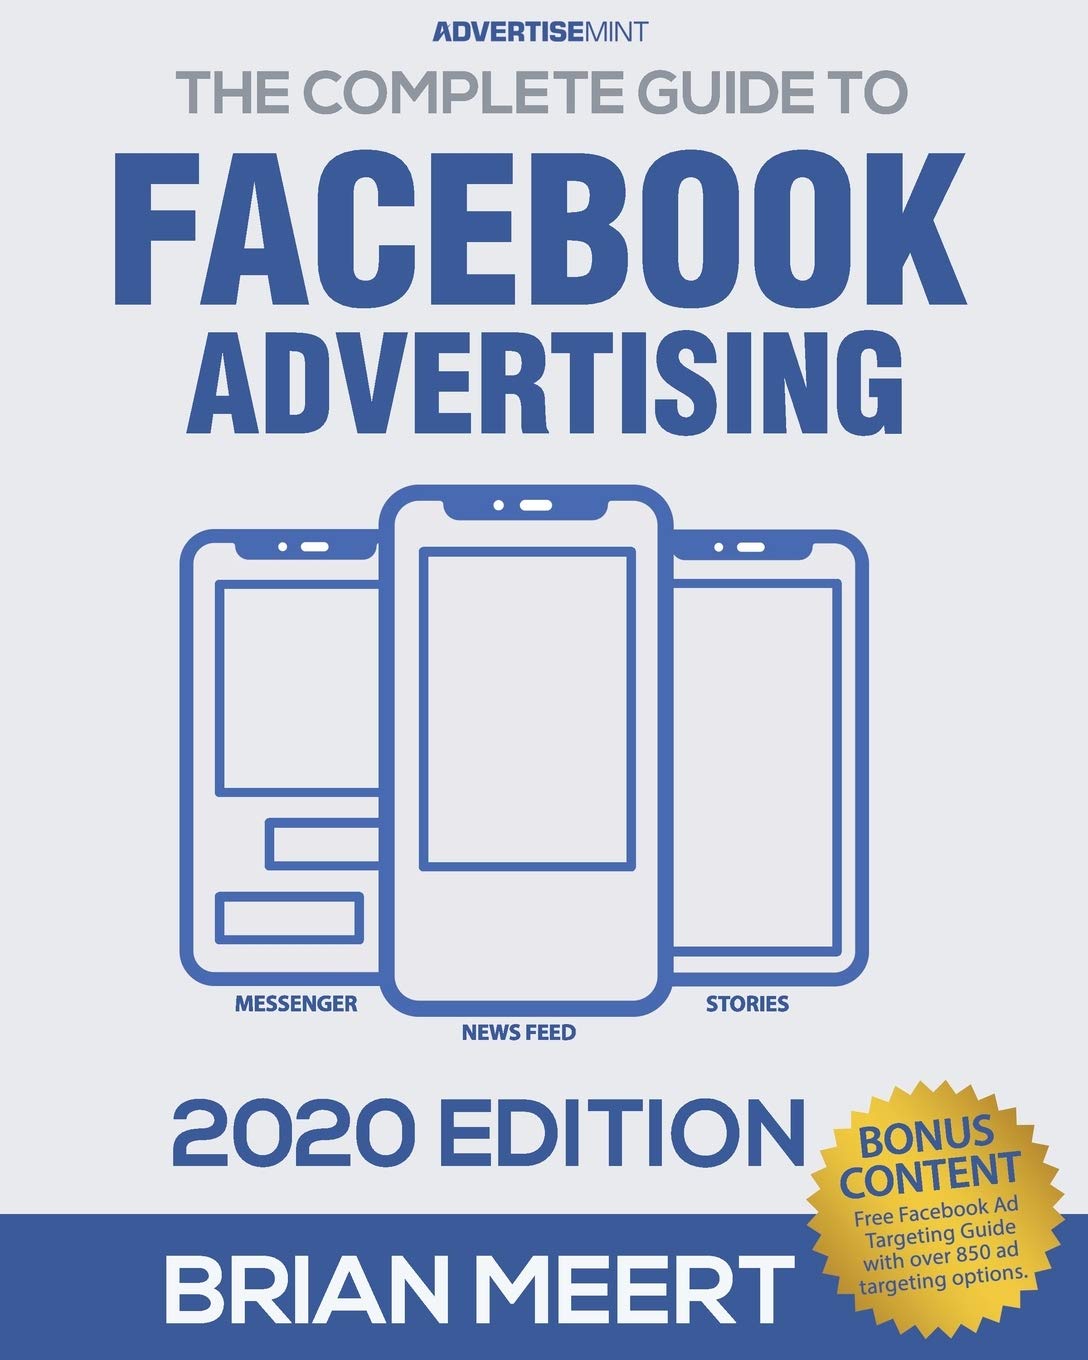 Brian Meert - The Complete Guide to Facebook Advertising Free Download